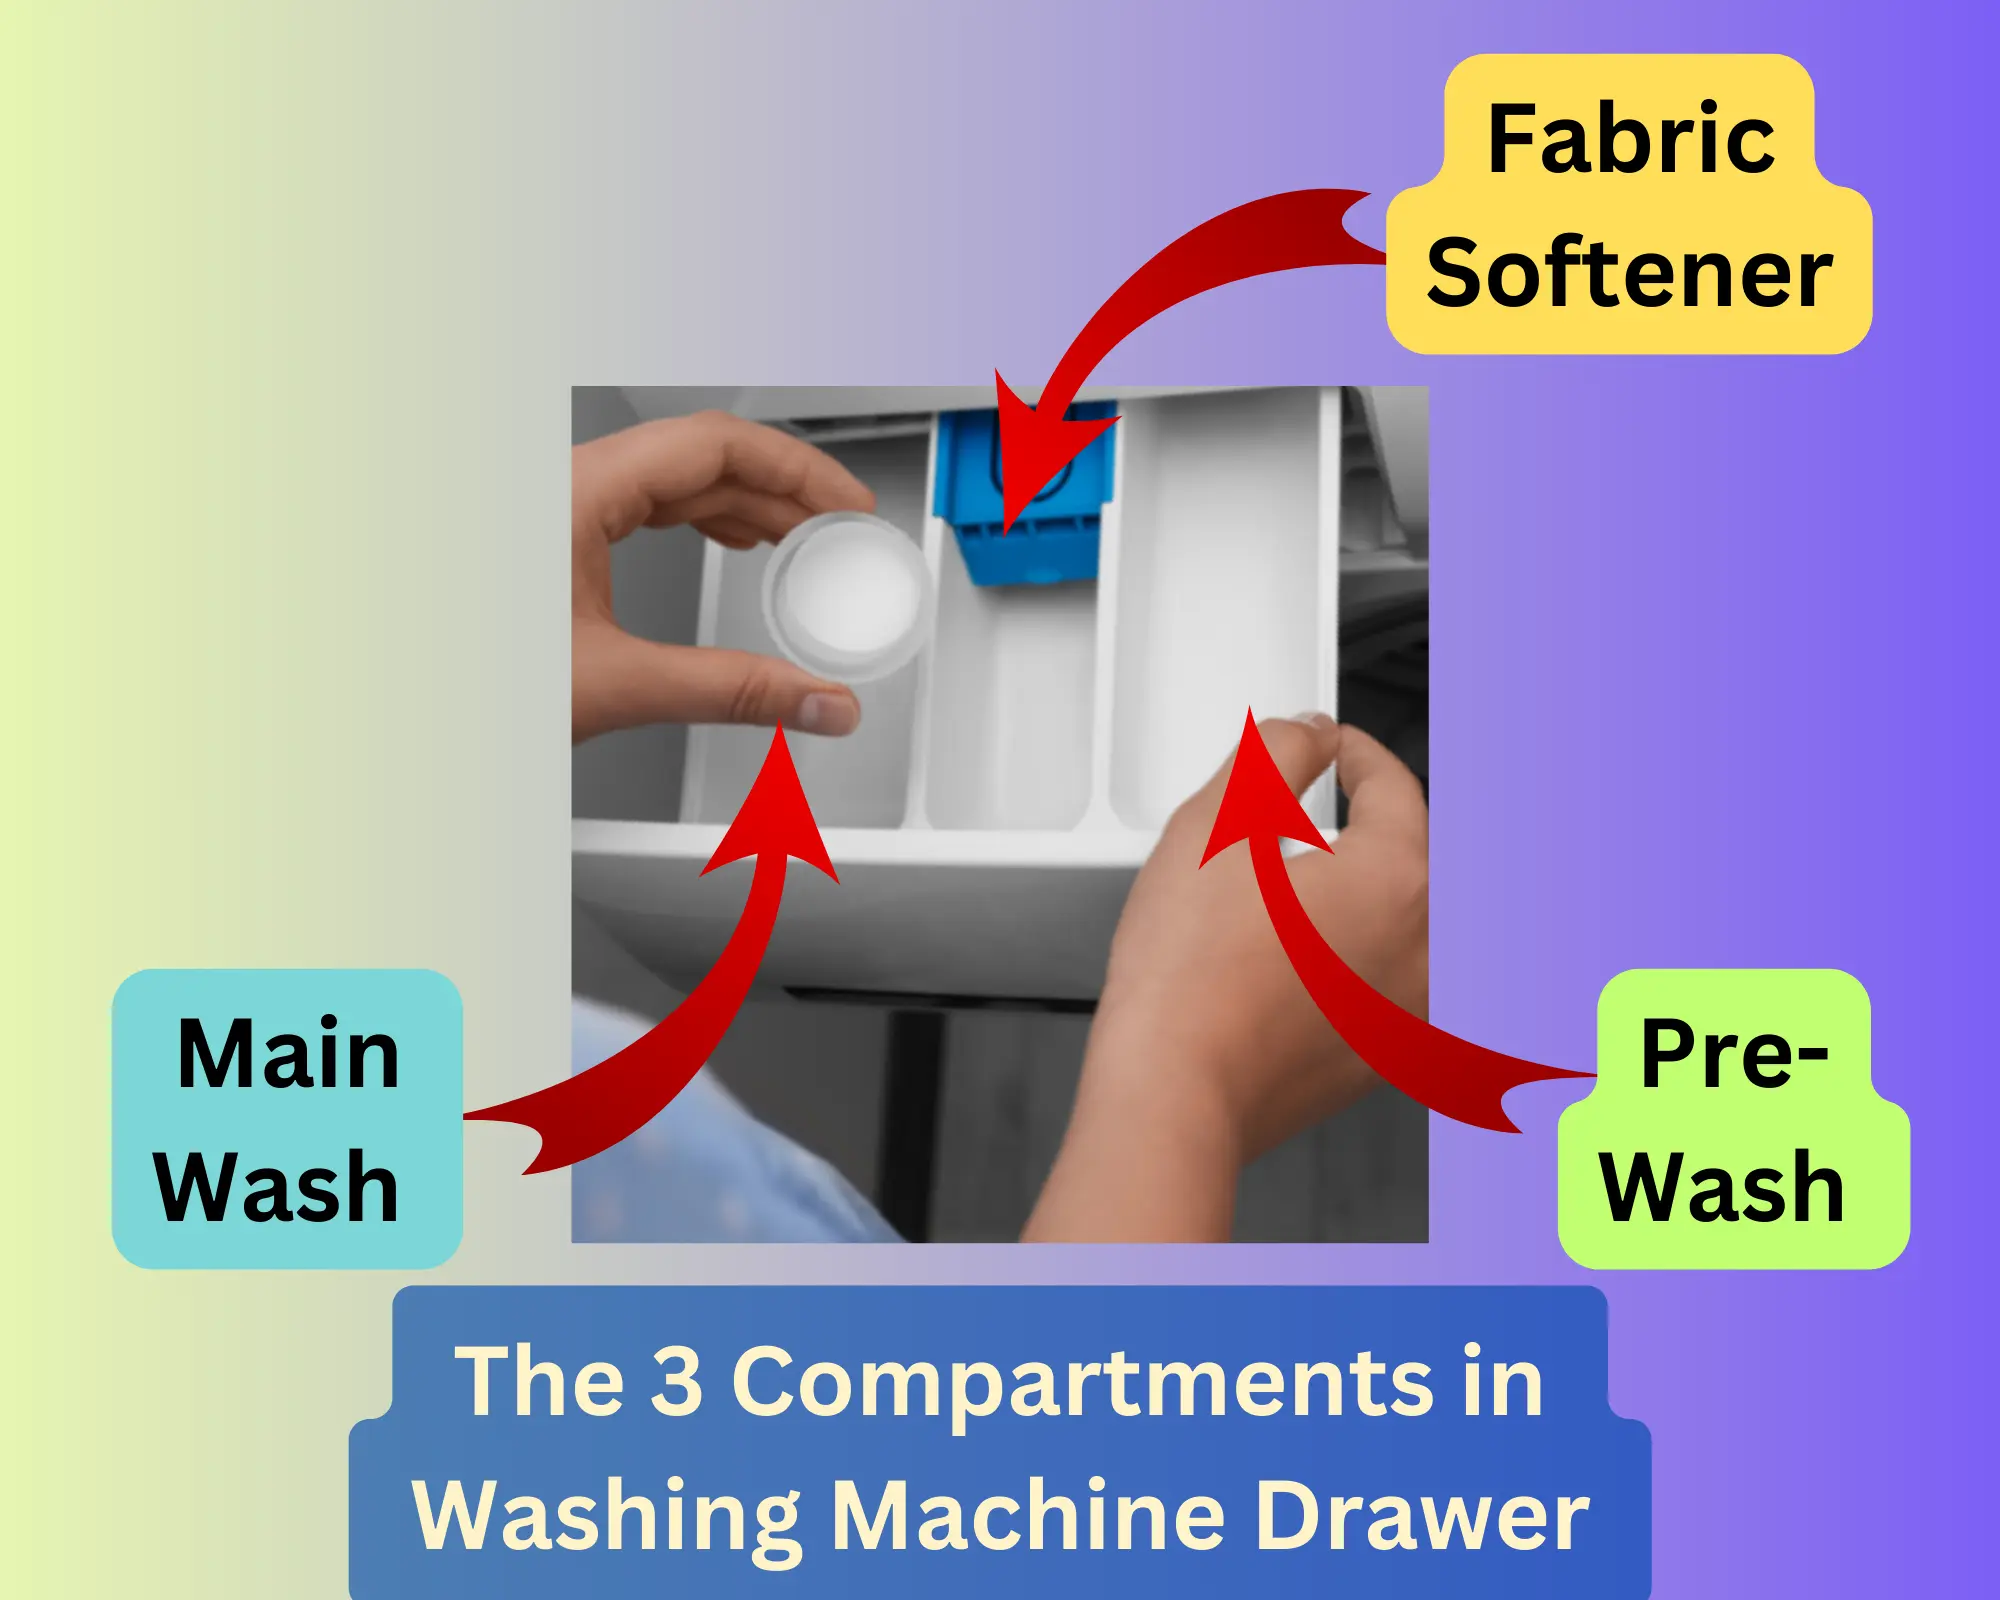 What are the 3 Compartments in Washing Machine Drawer